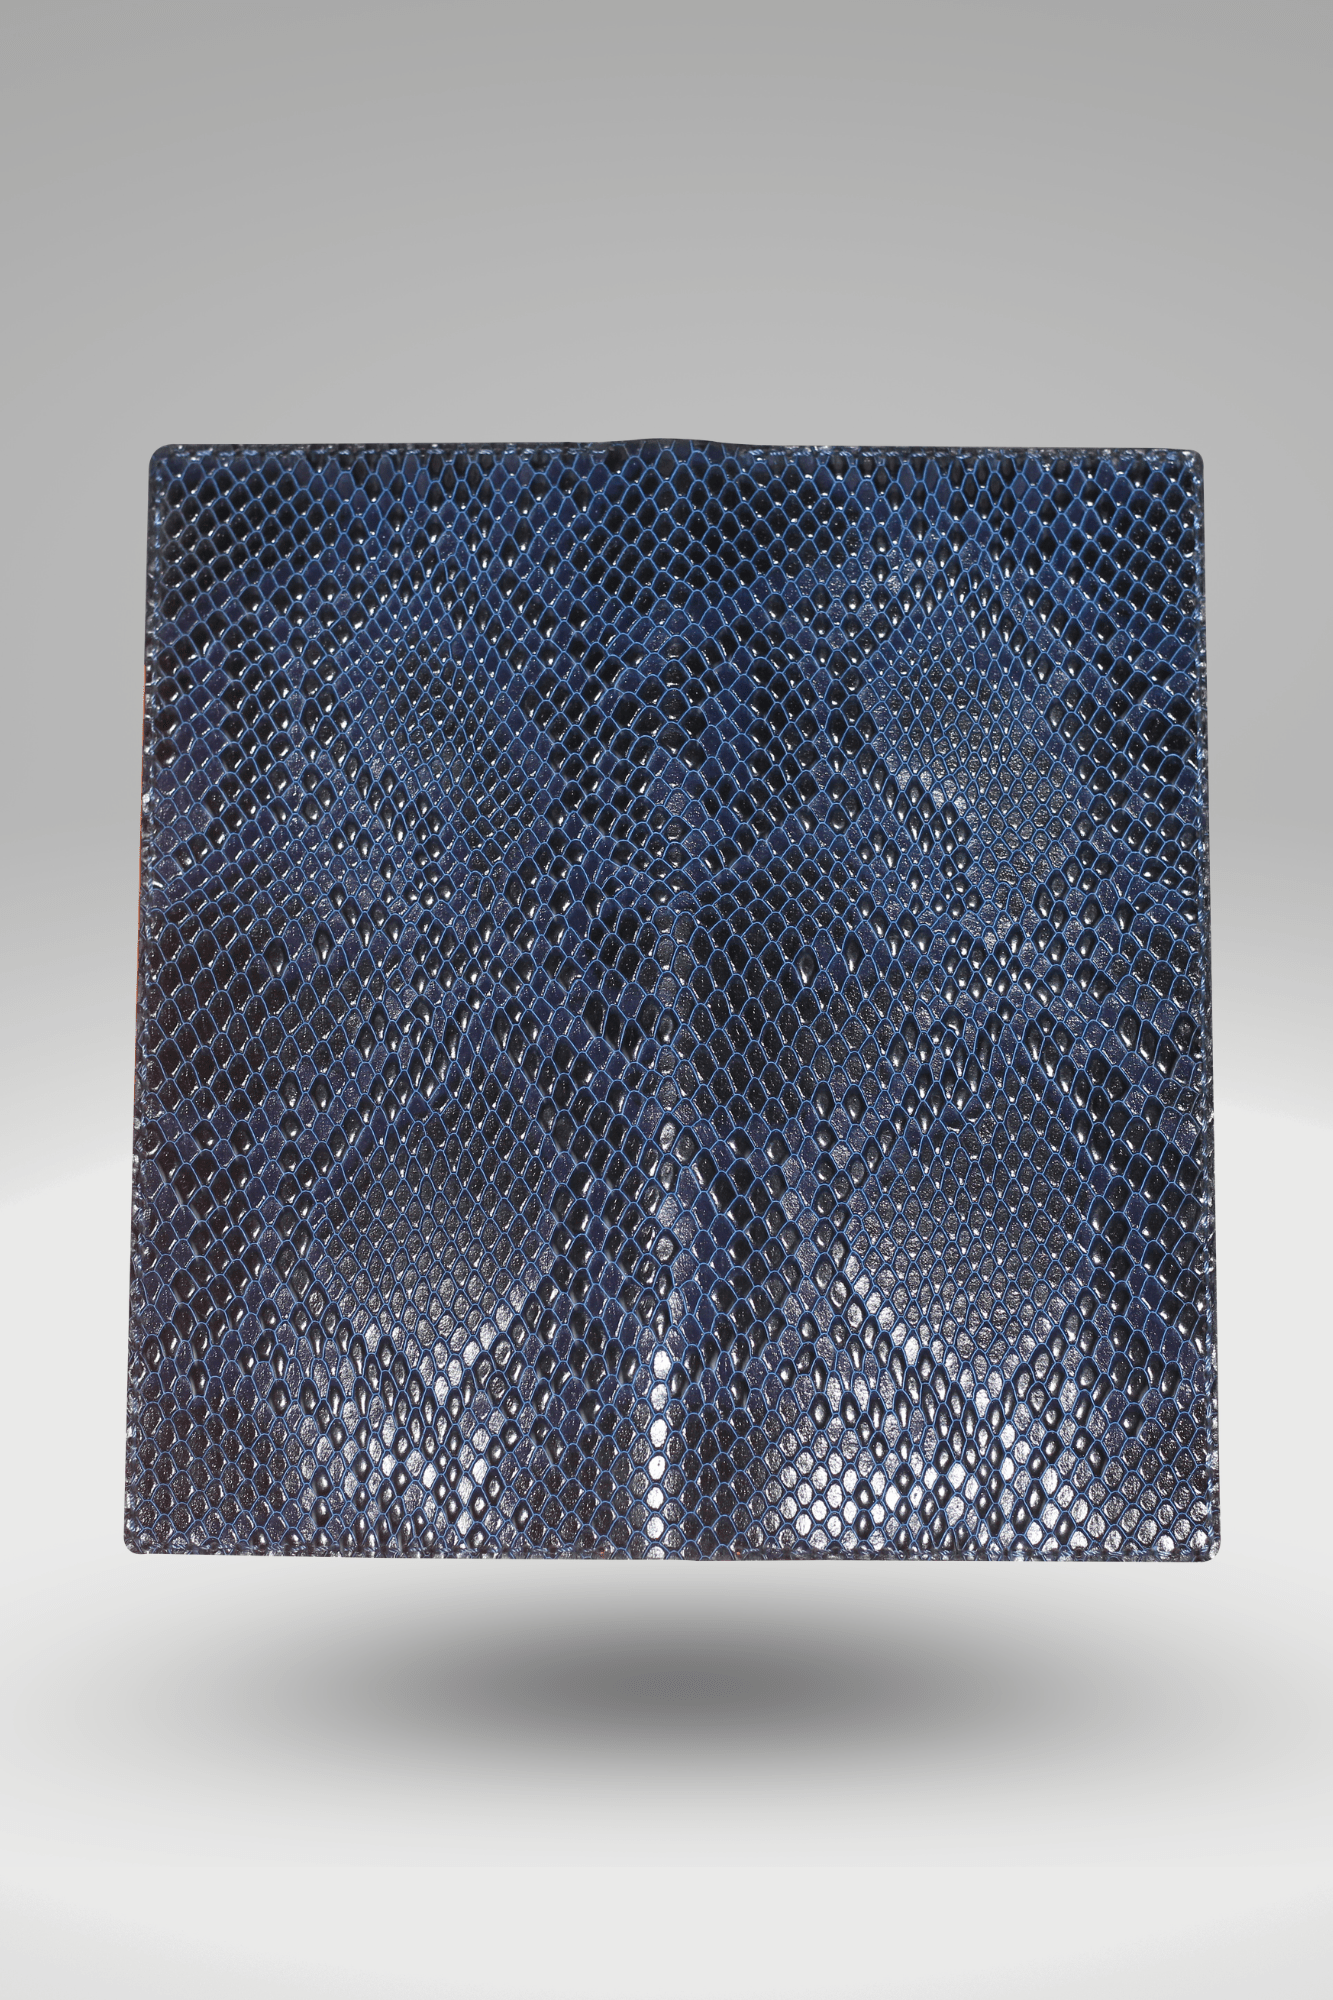 Unisex Genuine Leather Wallet With Blue Python Textured Finish